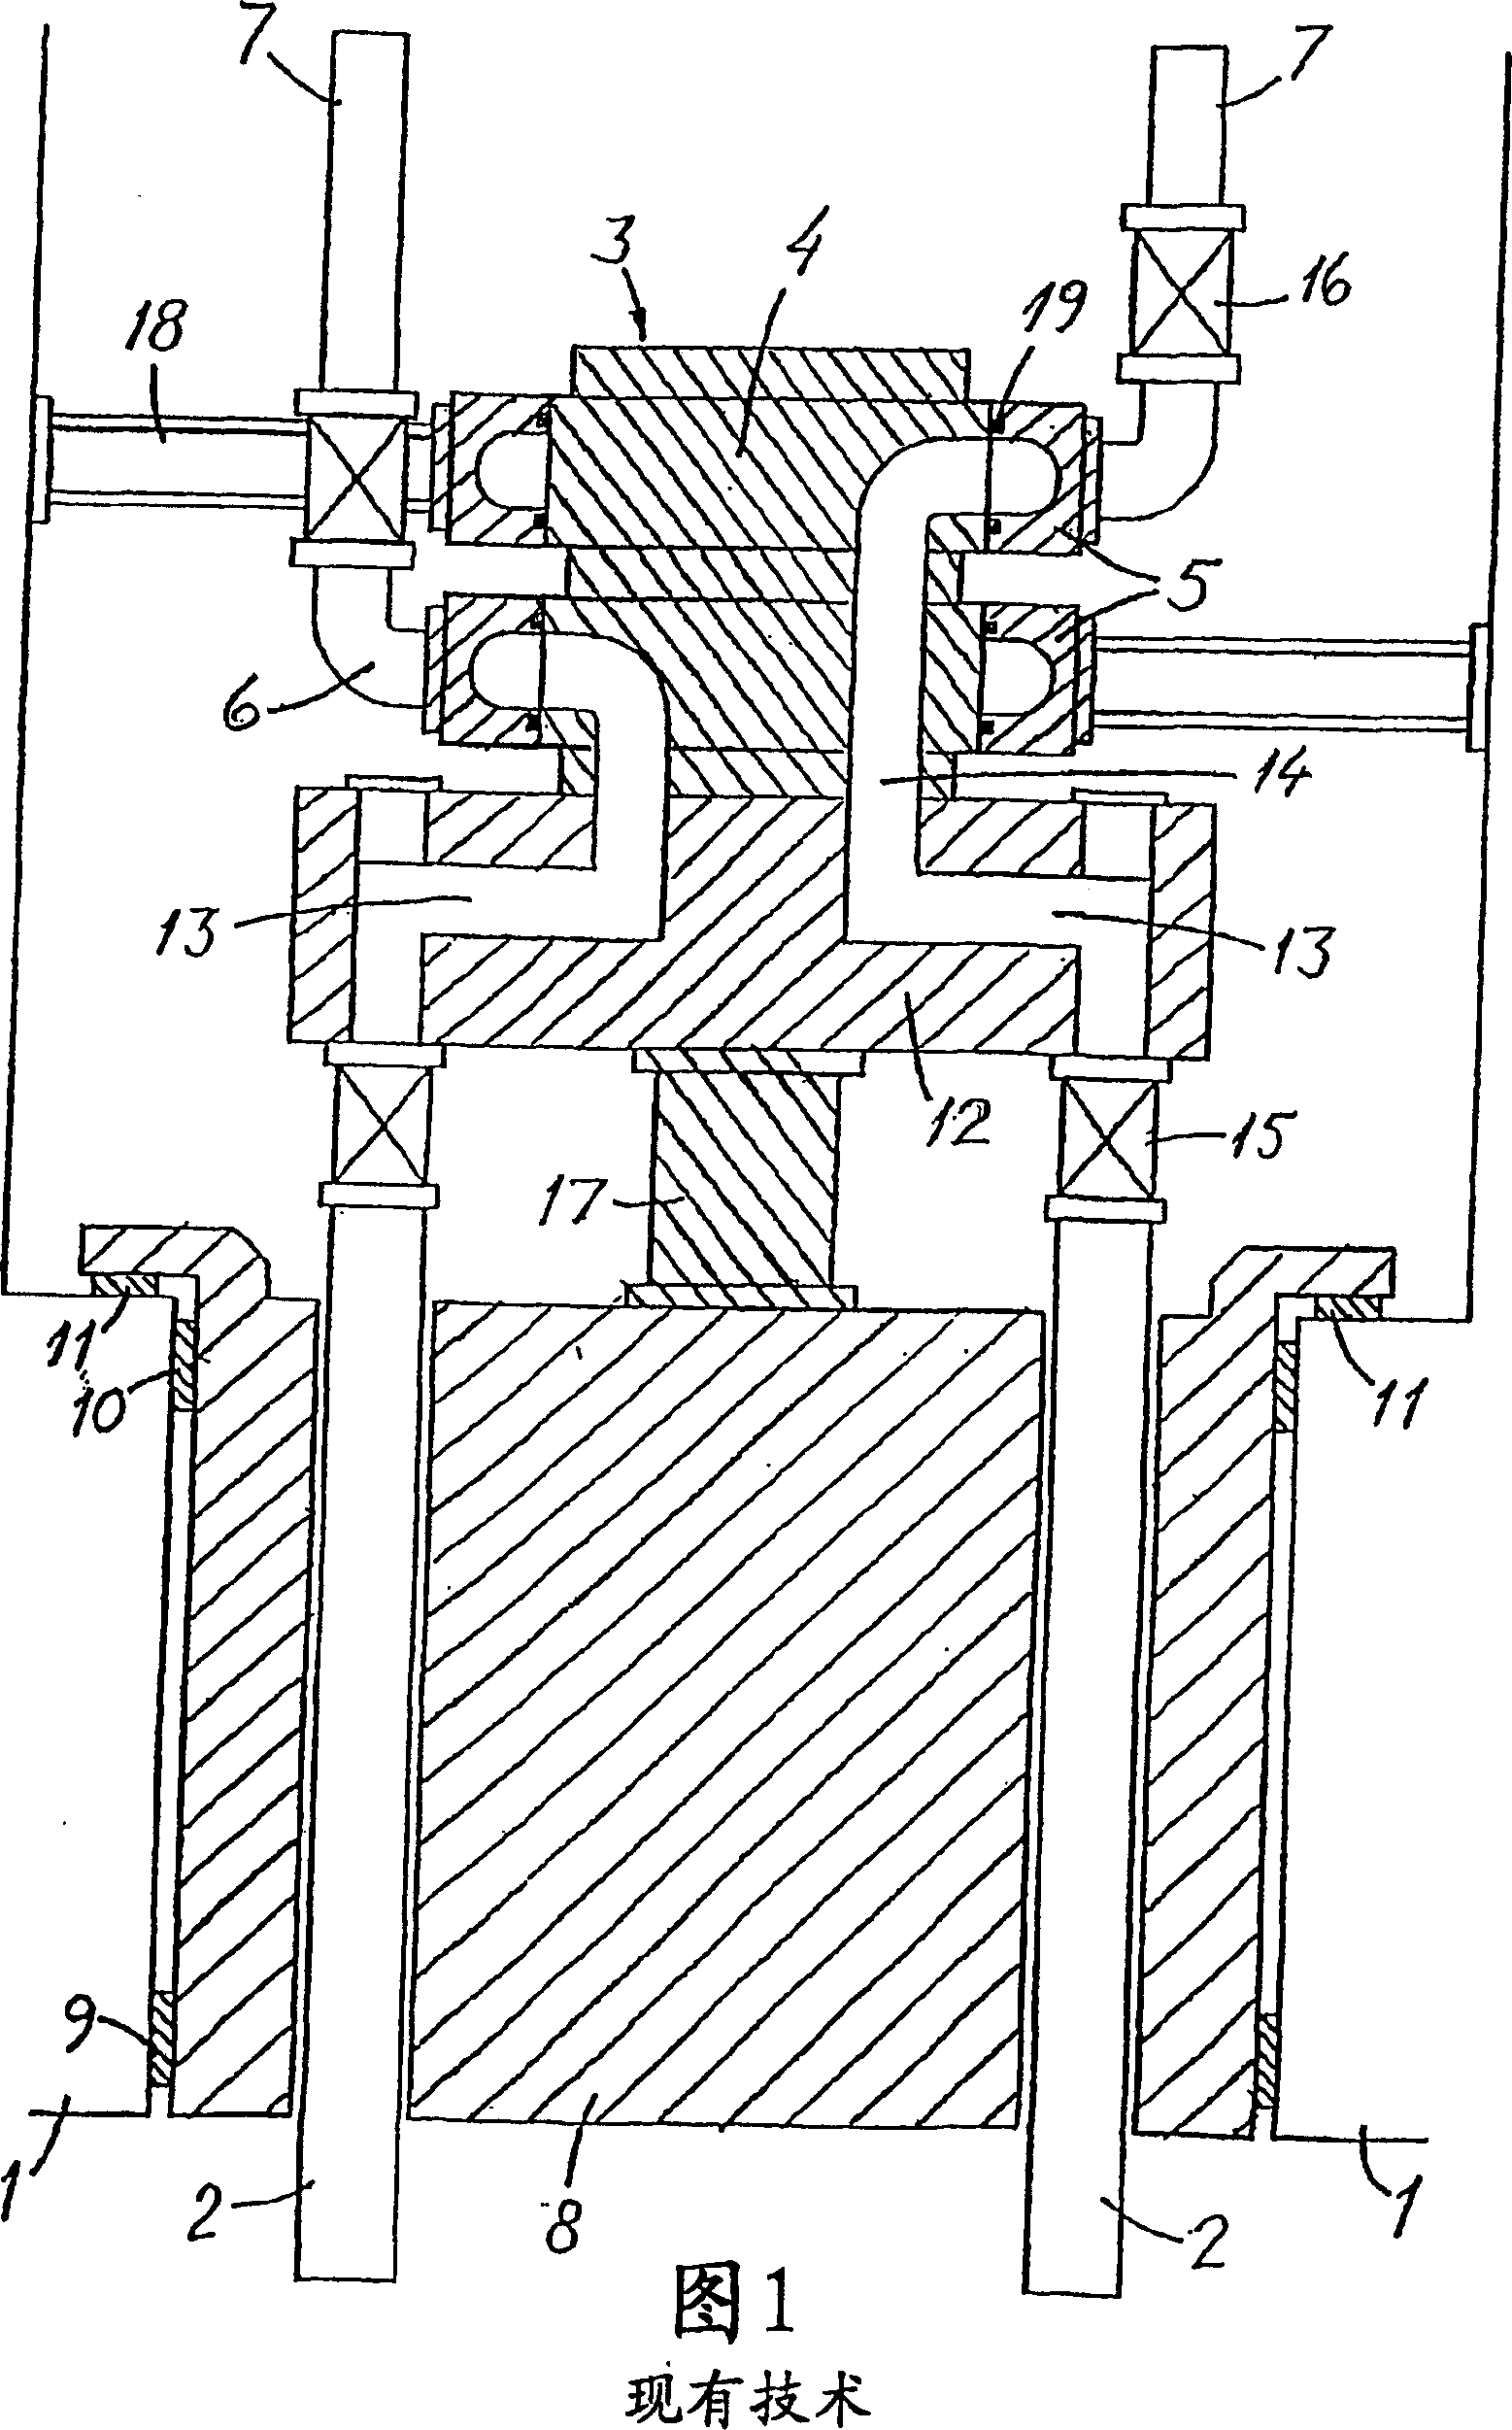 Apparatus for transferring hydrocarbons from a subsea source to a vessel